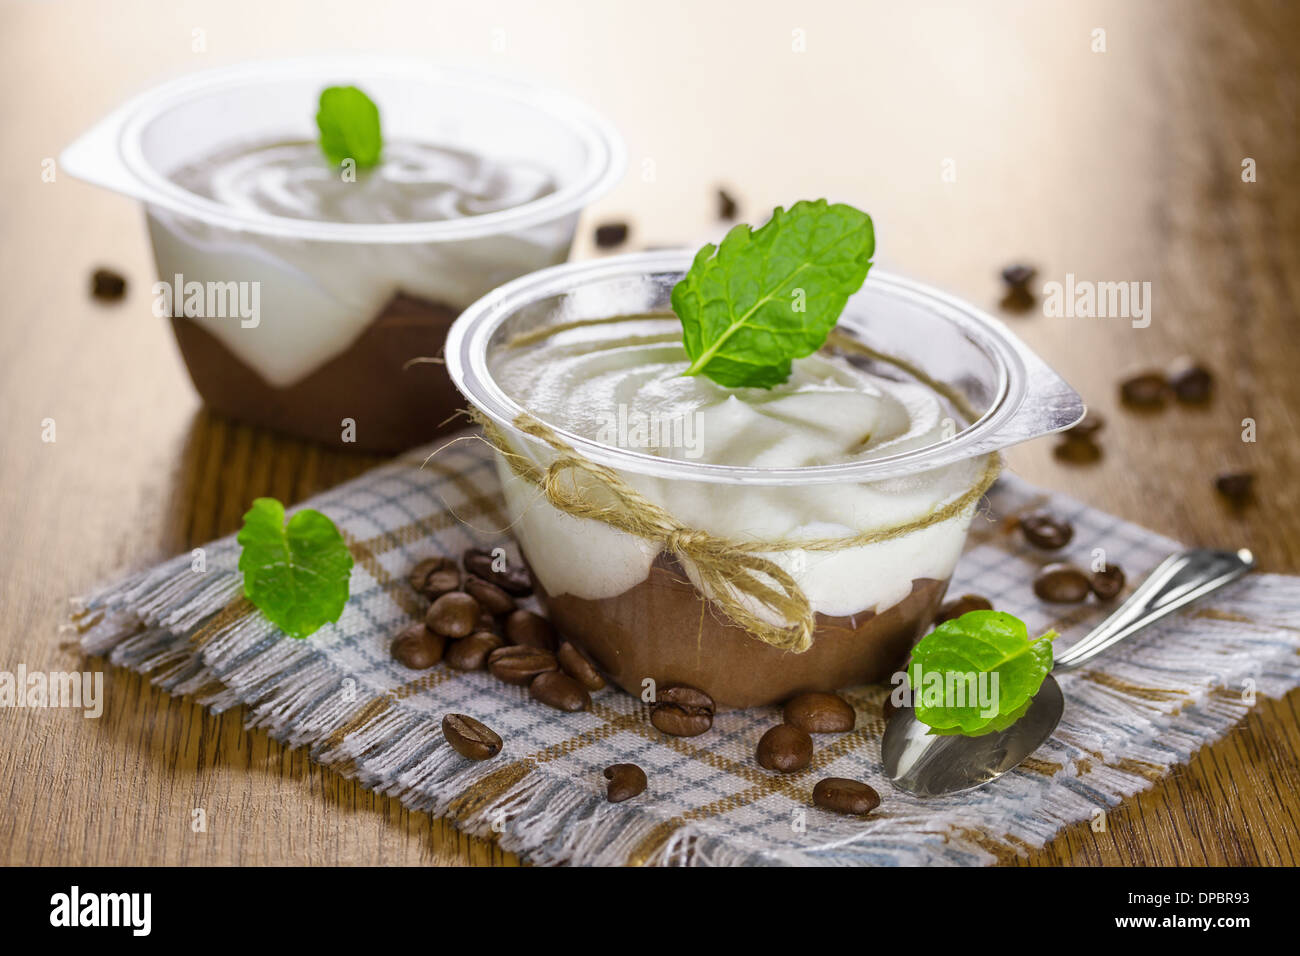 Chocolate pudding with whipped cream and mint leaves Stock Photo